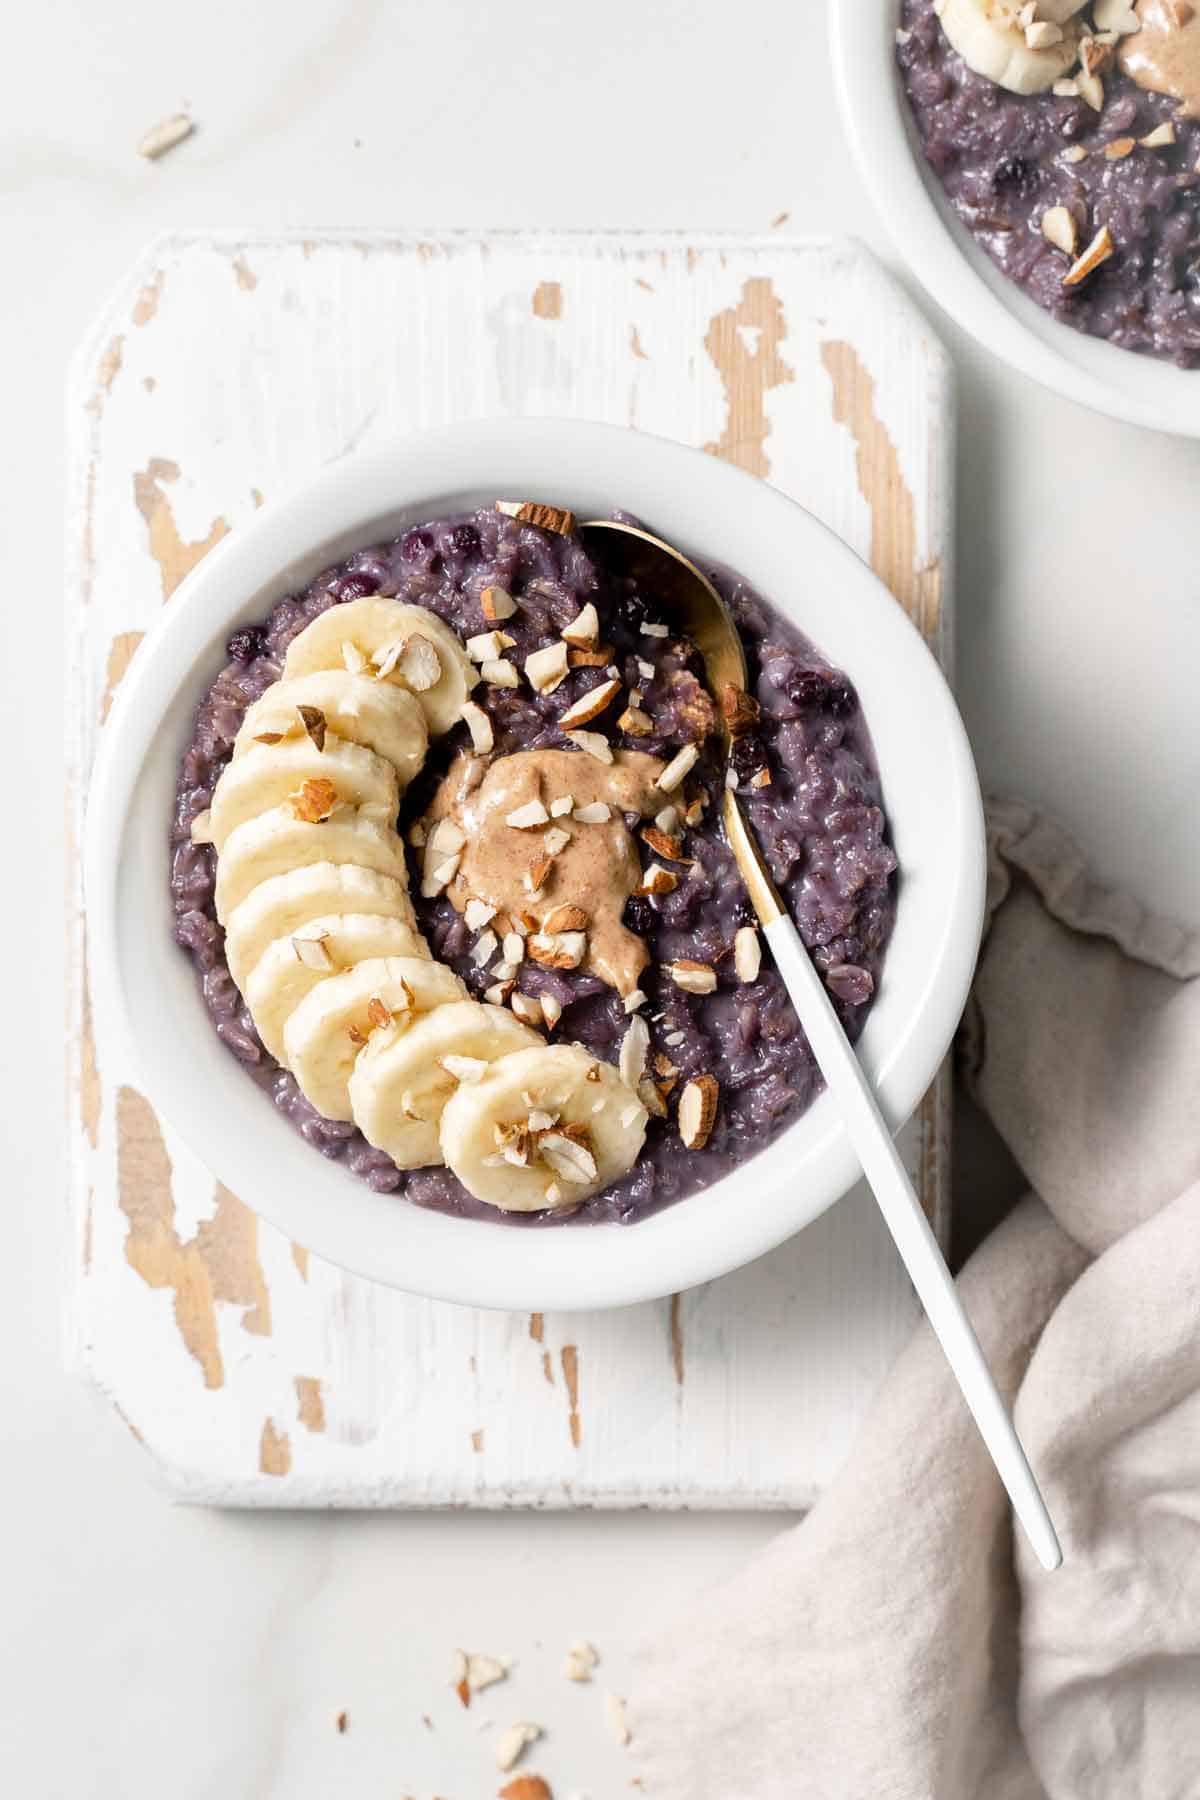 Overhead view of a bowl of blueberry oats with a dollop of nut butter and sliced bananas on top.